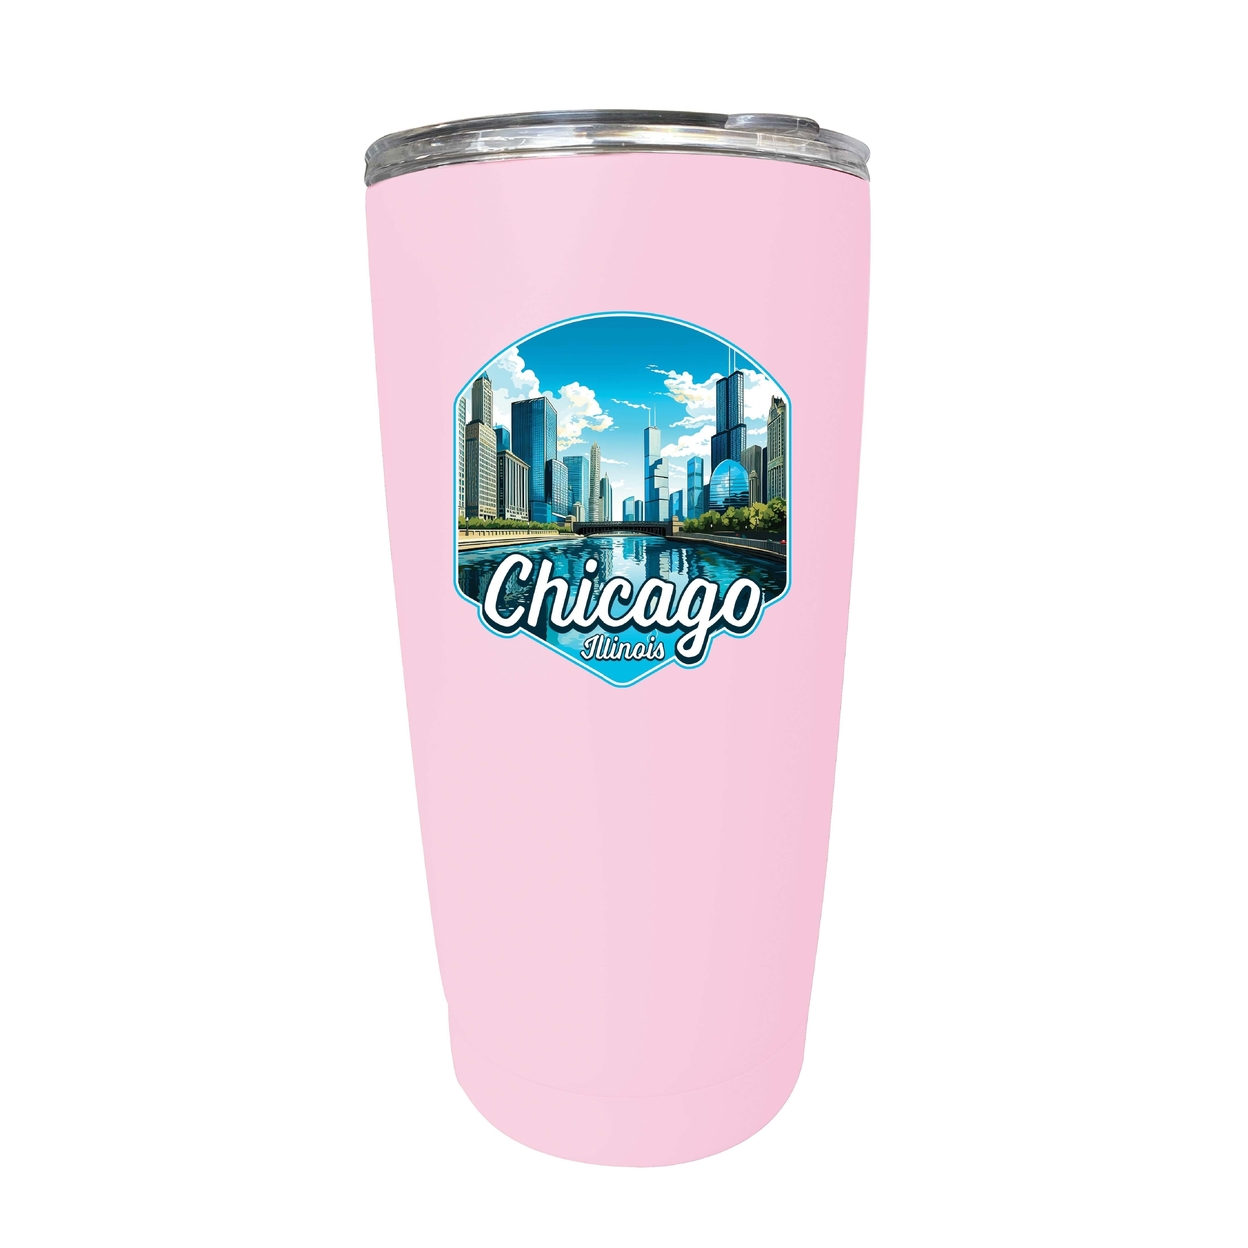 Chicago Illinois A Souvenir 16 Oz Insulated Tumbler - Pink,,4-Pack